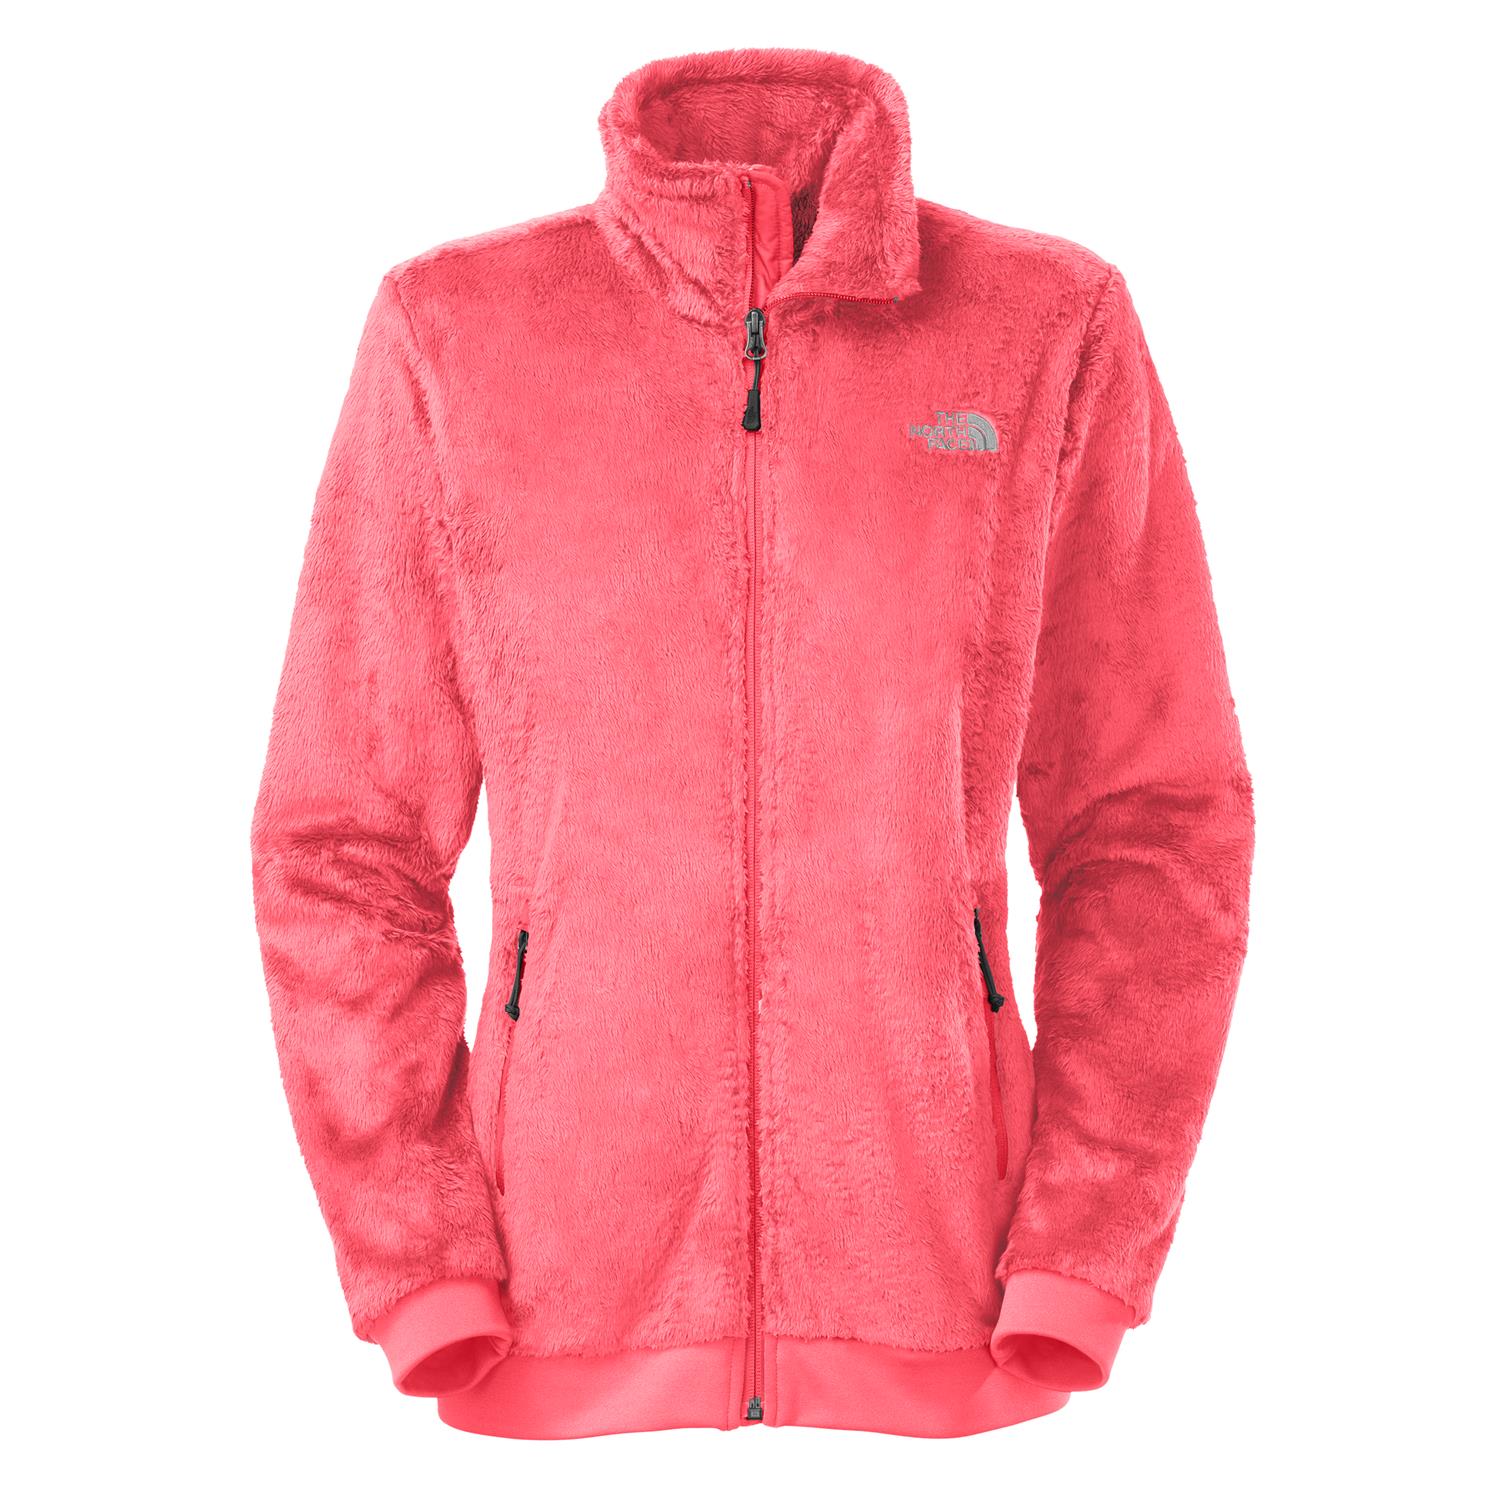 The North Face Mod-Osito Jacket - Women's | evo outlet